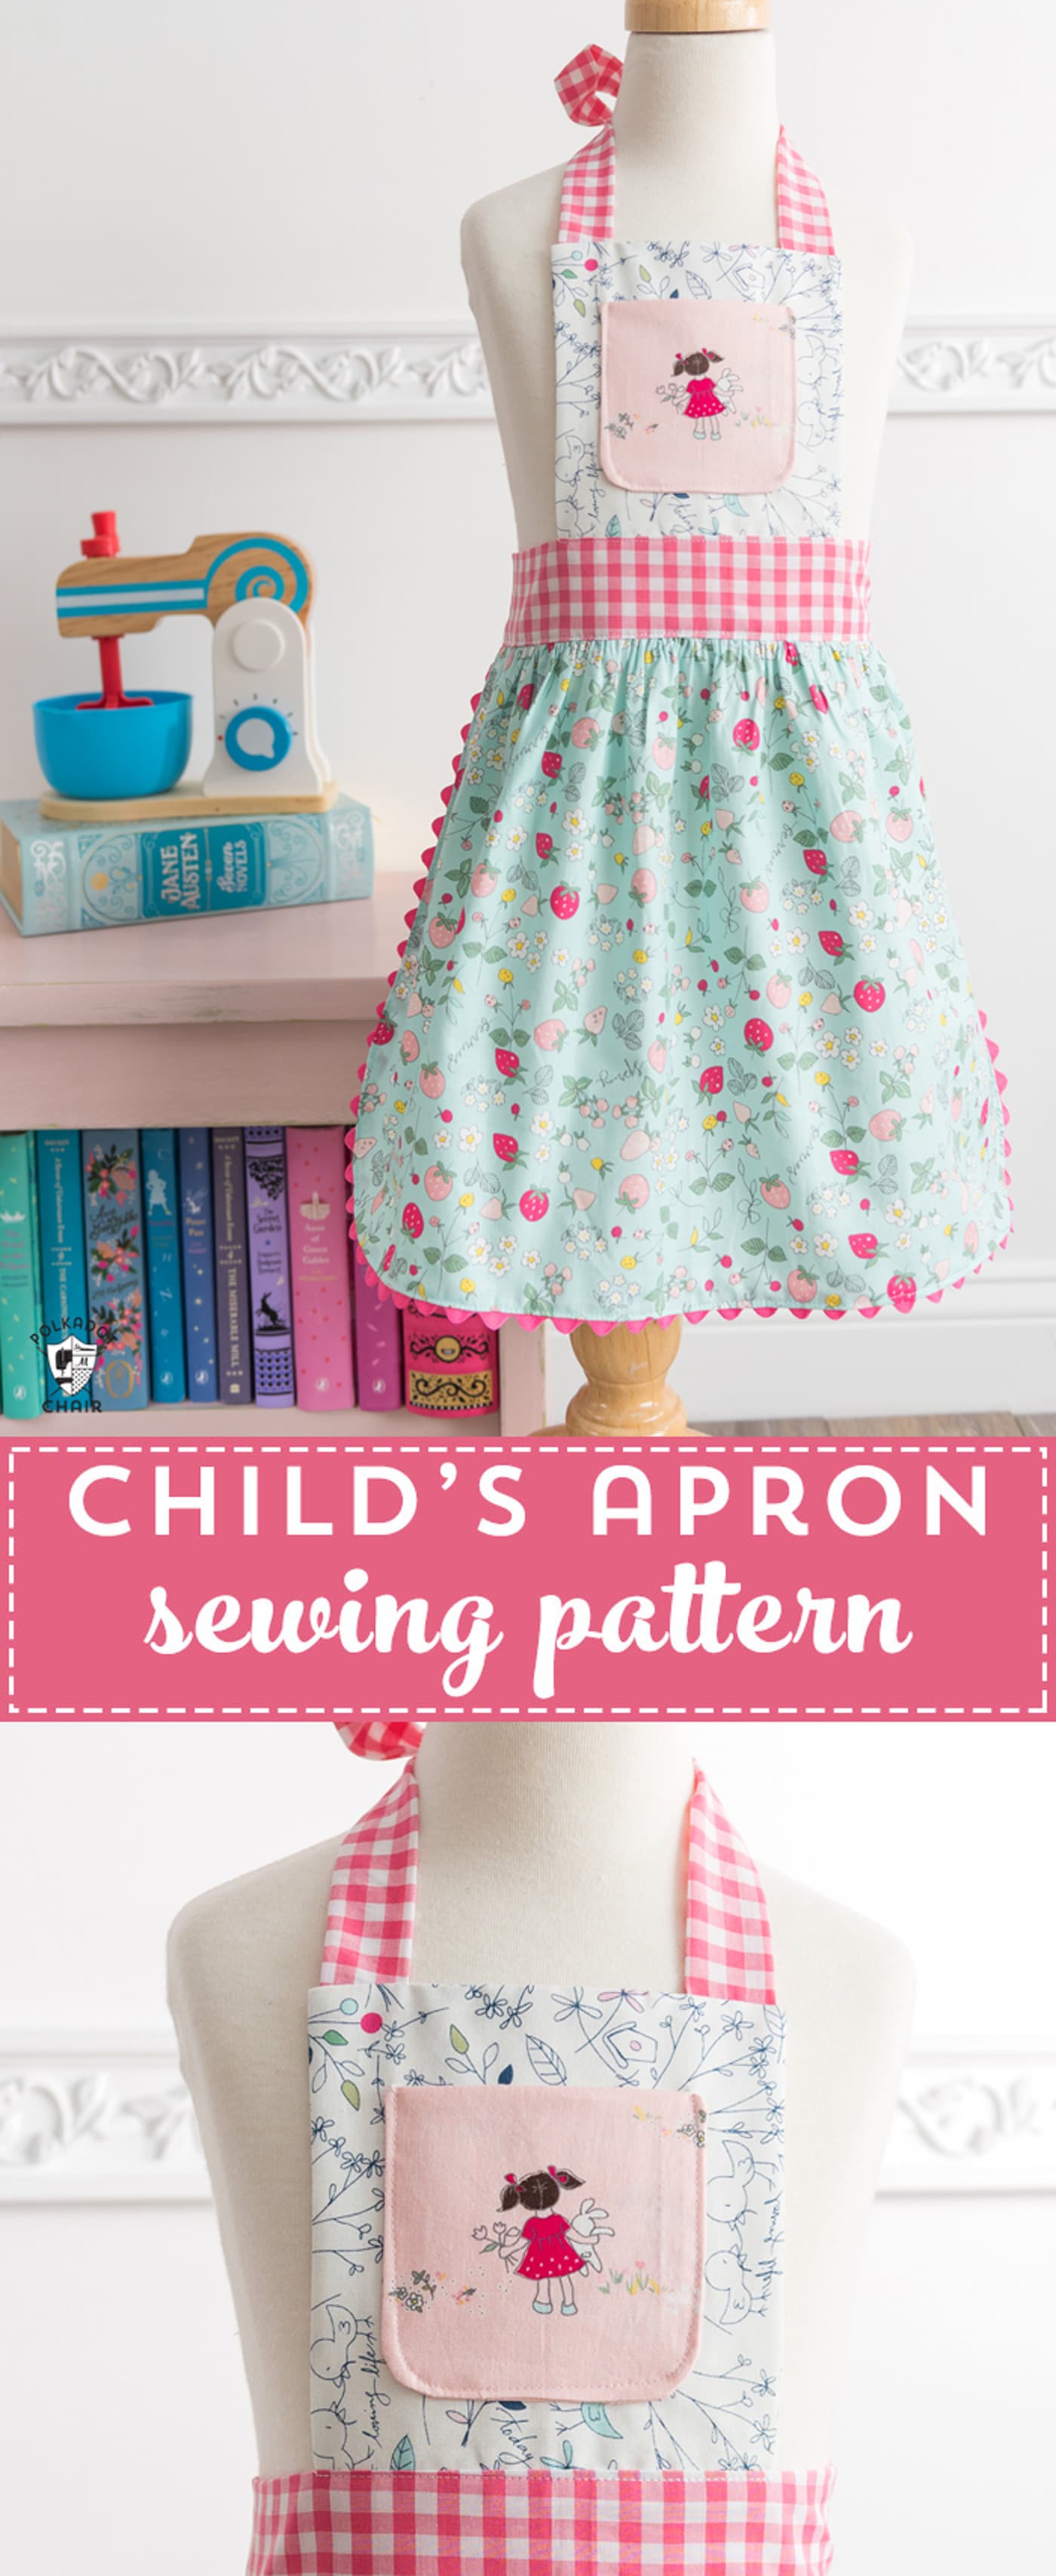 how-to-sew-kids-aprons-a-free-child-s-apron-pattern-polka-dot-chair